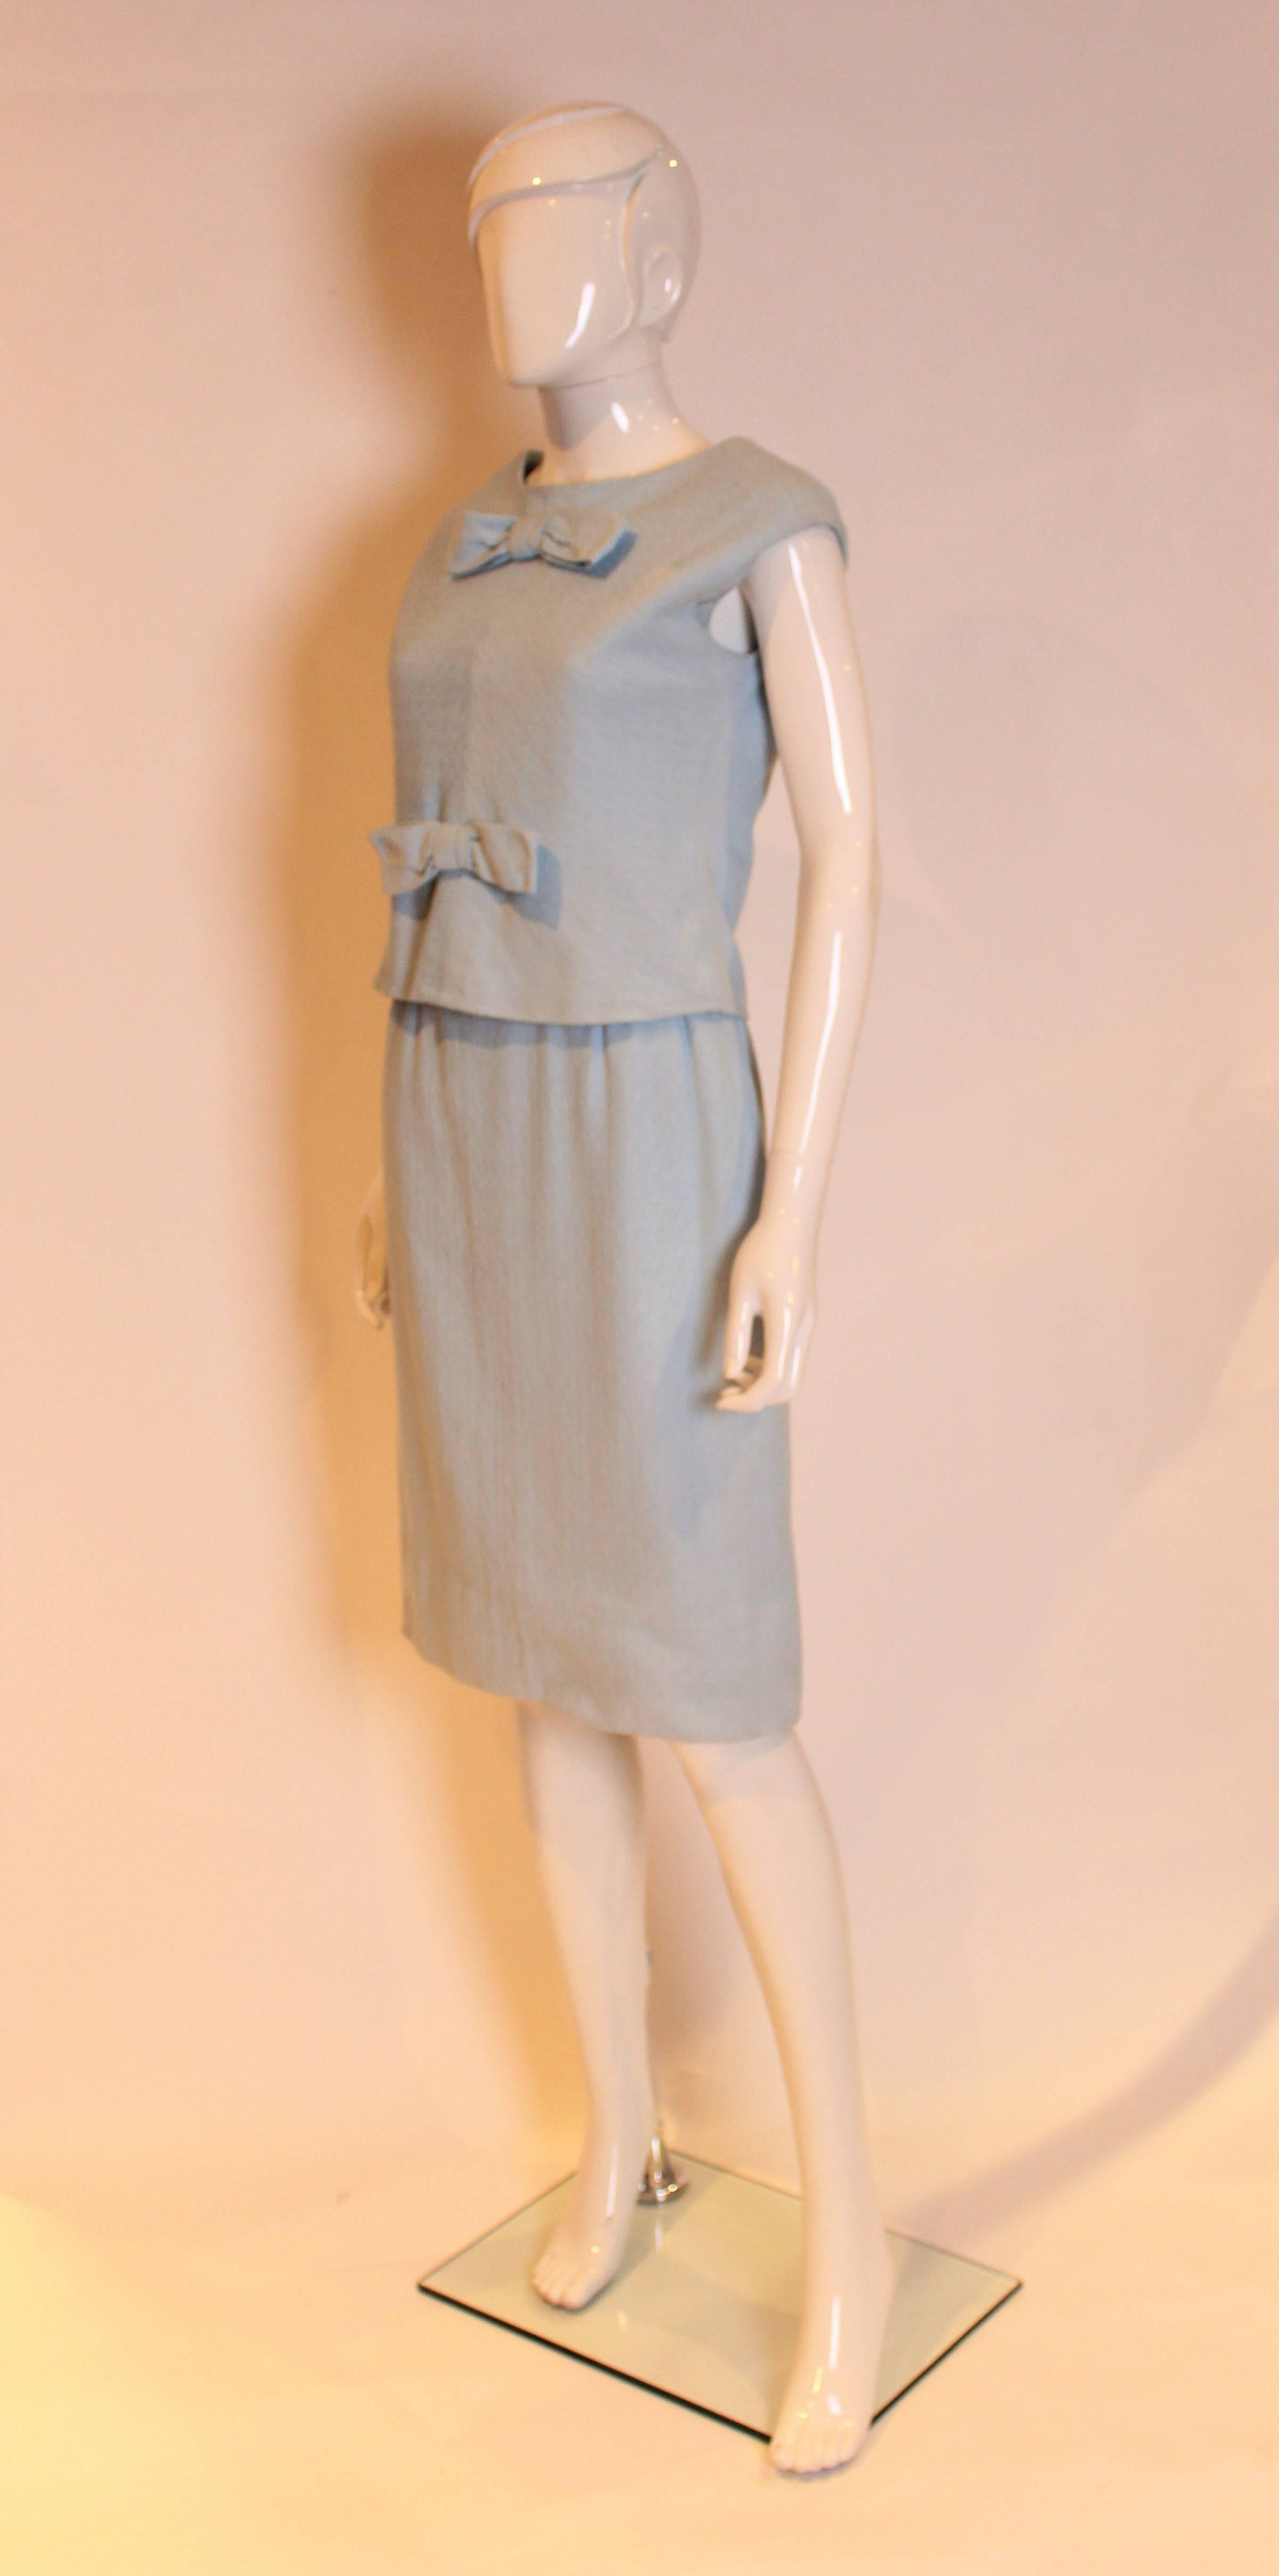 A chic dress by Yves Saint Laurent ,made for the British department store, Fortnum and Mason. In textured light blue wool, the dress has a removeable shell top with four button back and two bows on the front. The under dress has a shift top with